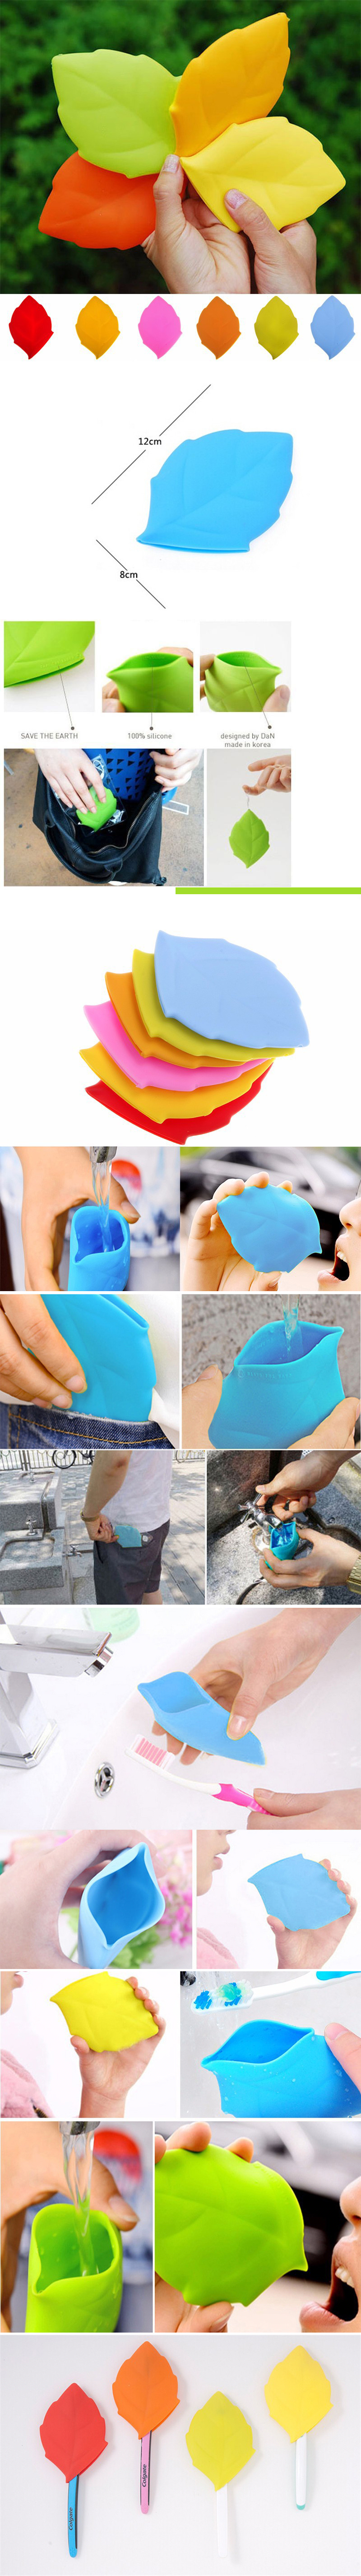 Maple-Leaf-Silicone-Water-Cup-Portable-Drinking-Bottle-Ourdoors-Cycling-Pocket-Mug-Toothbrush-Cover-1092588